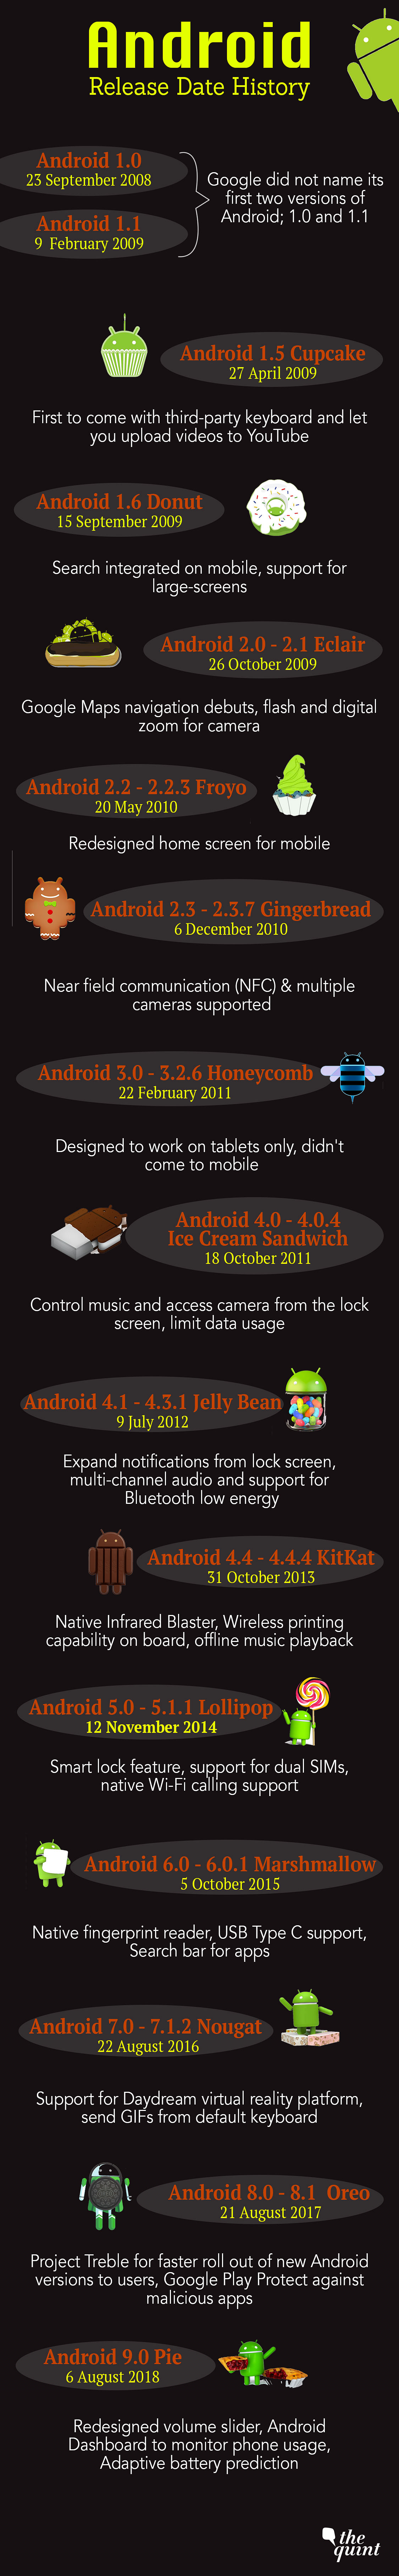 Android’s first ever beta release for the public came out on 5 November 2007. Here’s a look at how it has grown.